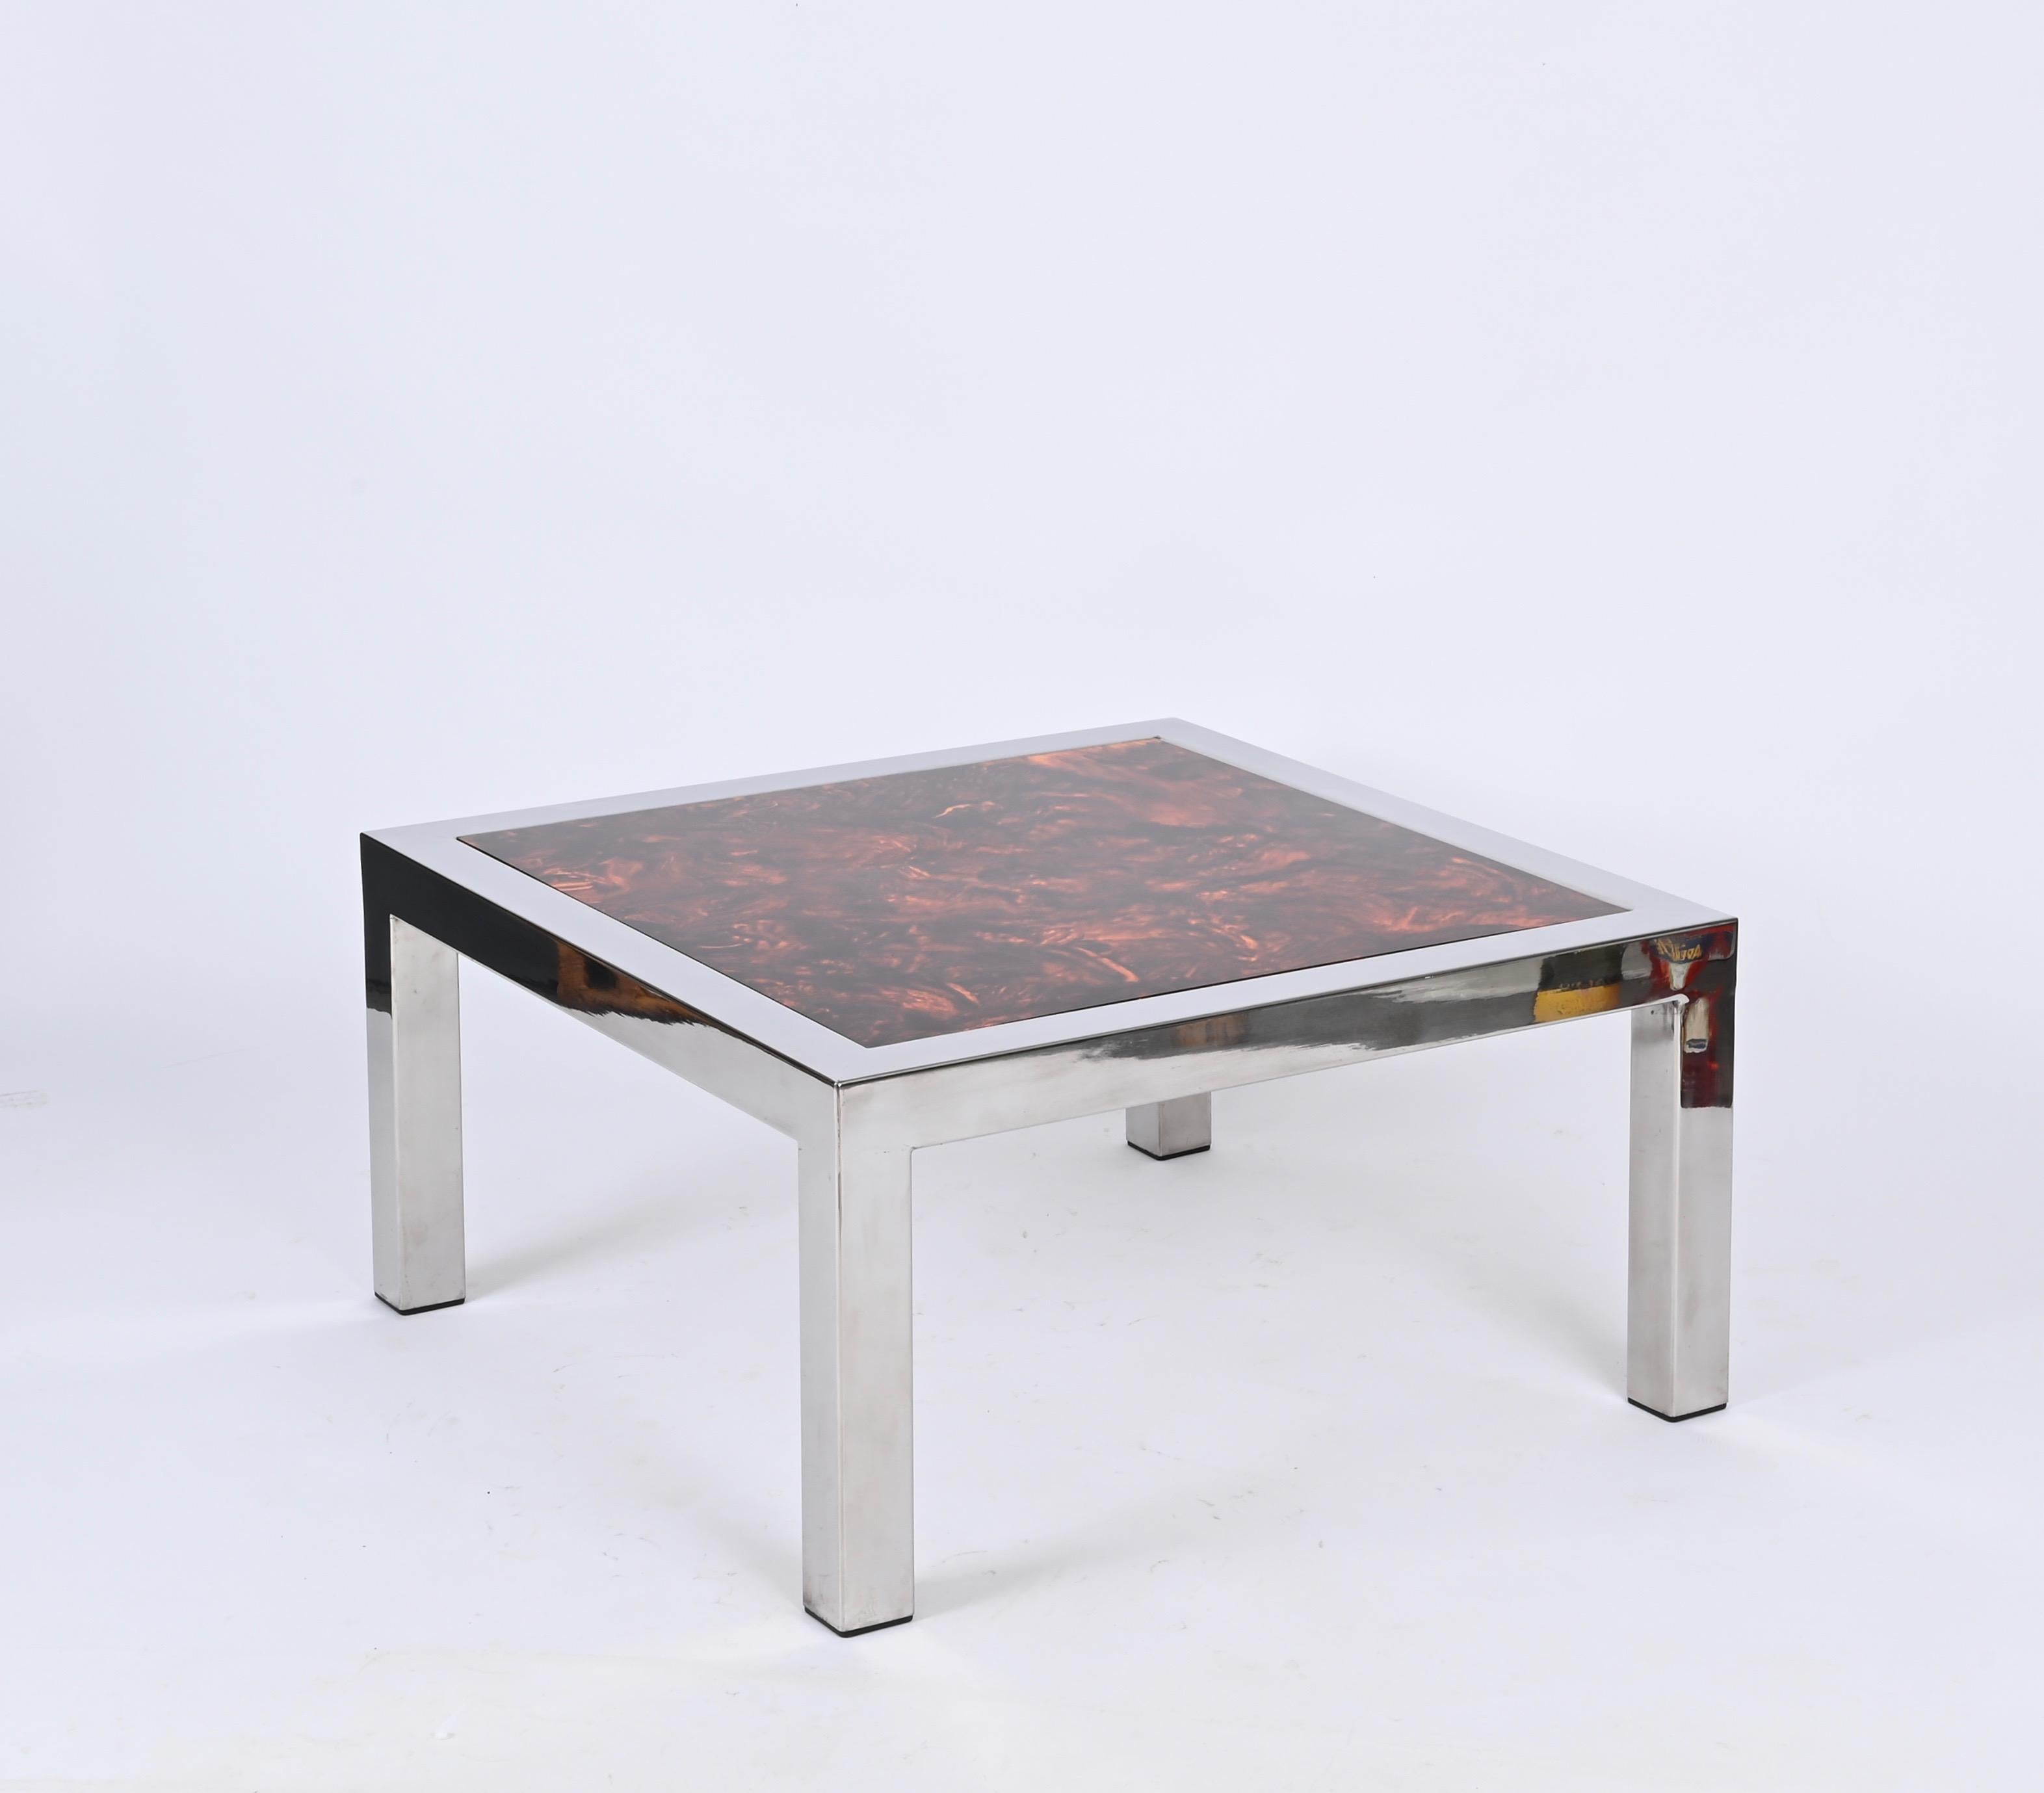 Chromed Steel and Tortoiseshell Effect Lucite Square Coffee Table, Italy 1970s For Sale 7